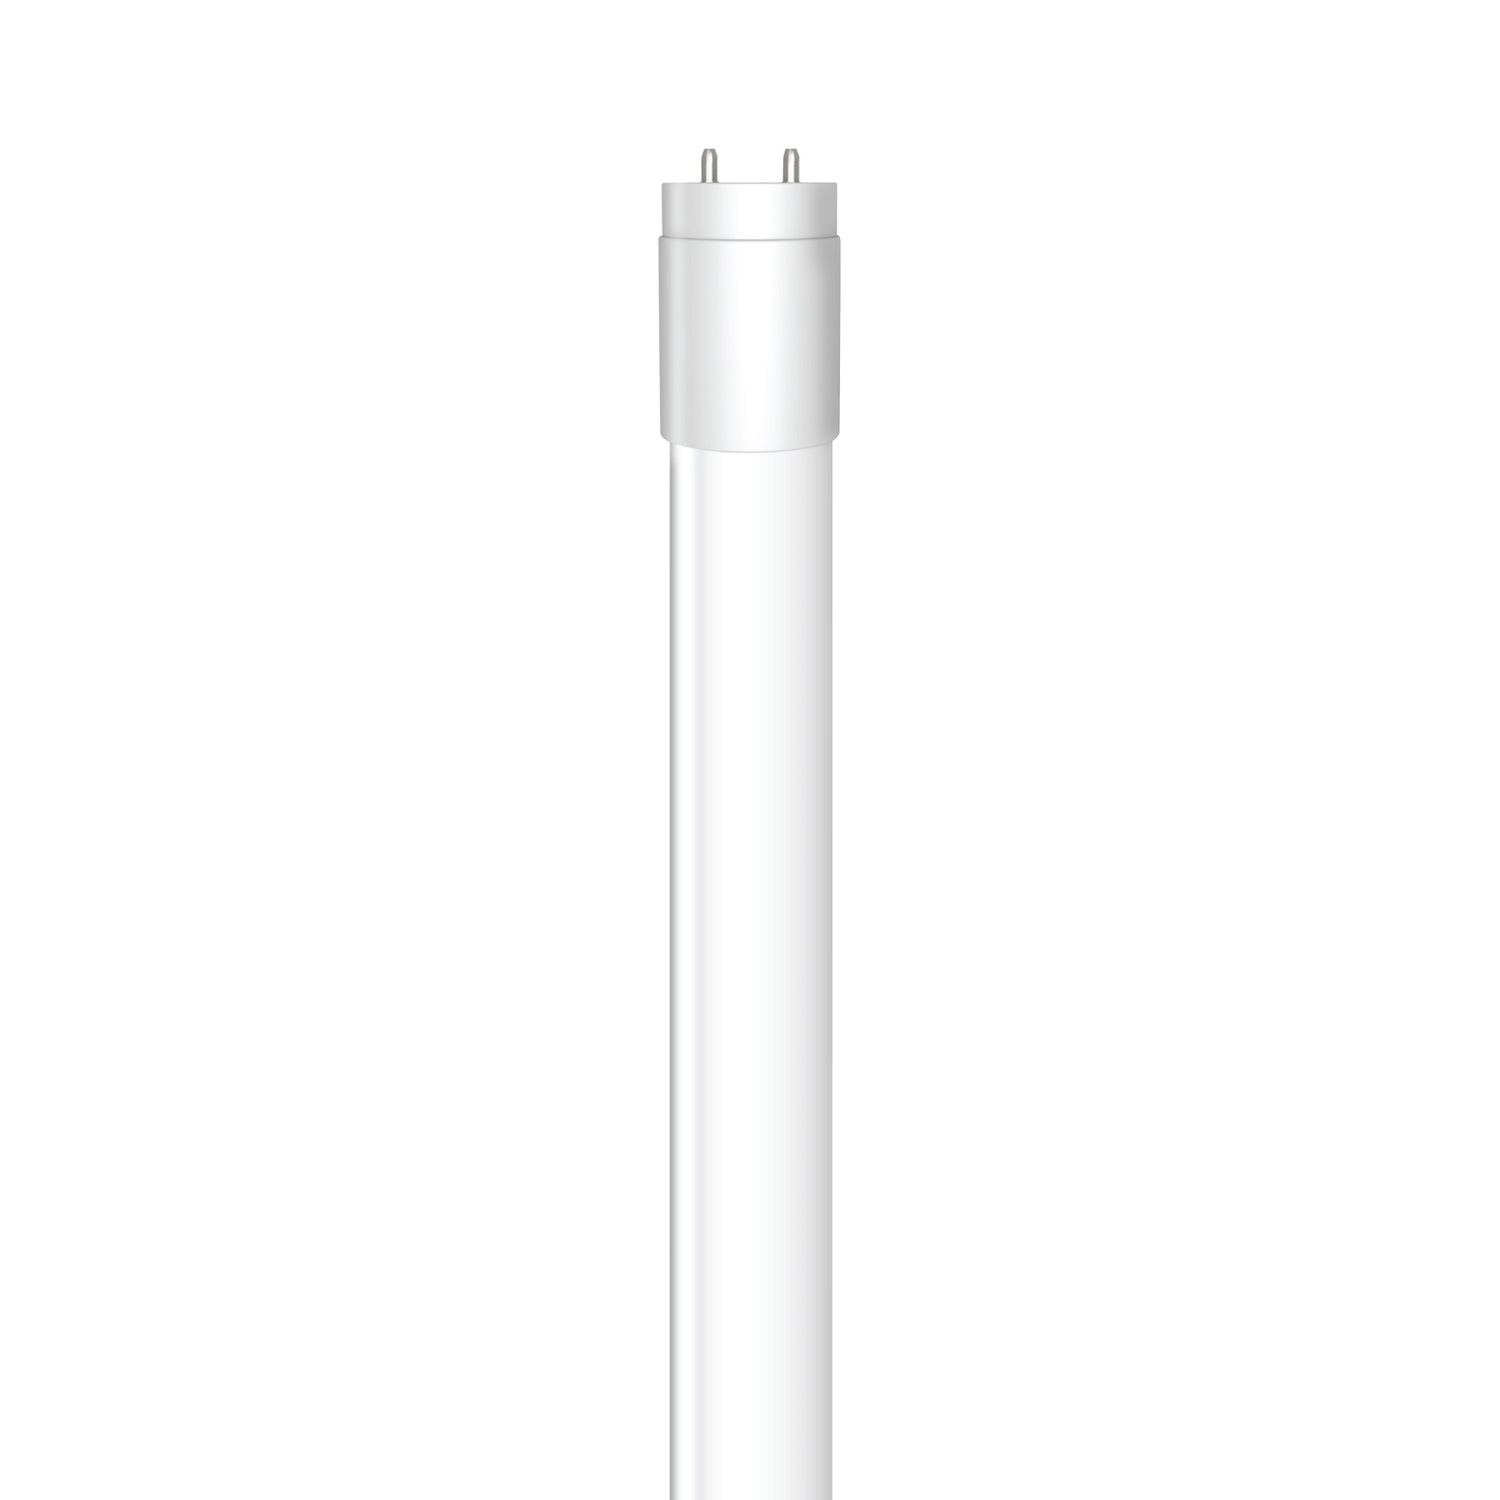 3 ft. 16W (30W Replacement) Selectable White G13 Base (T12 Replacement) Direct Replacement (Type A) Linear LED Tube